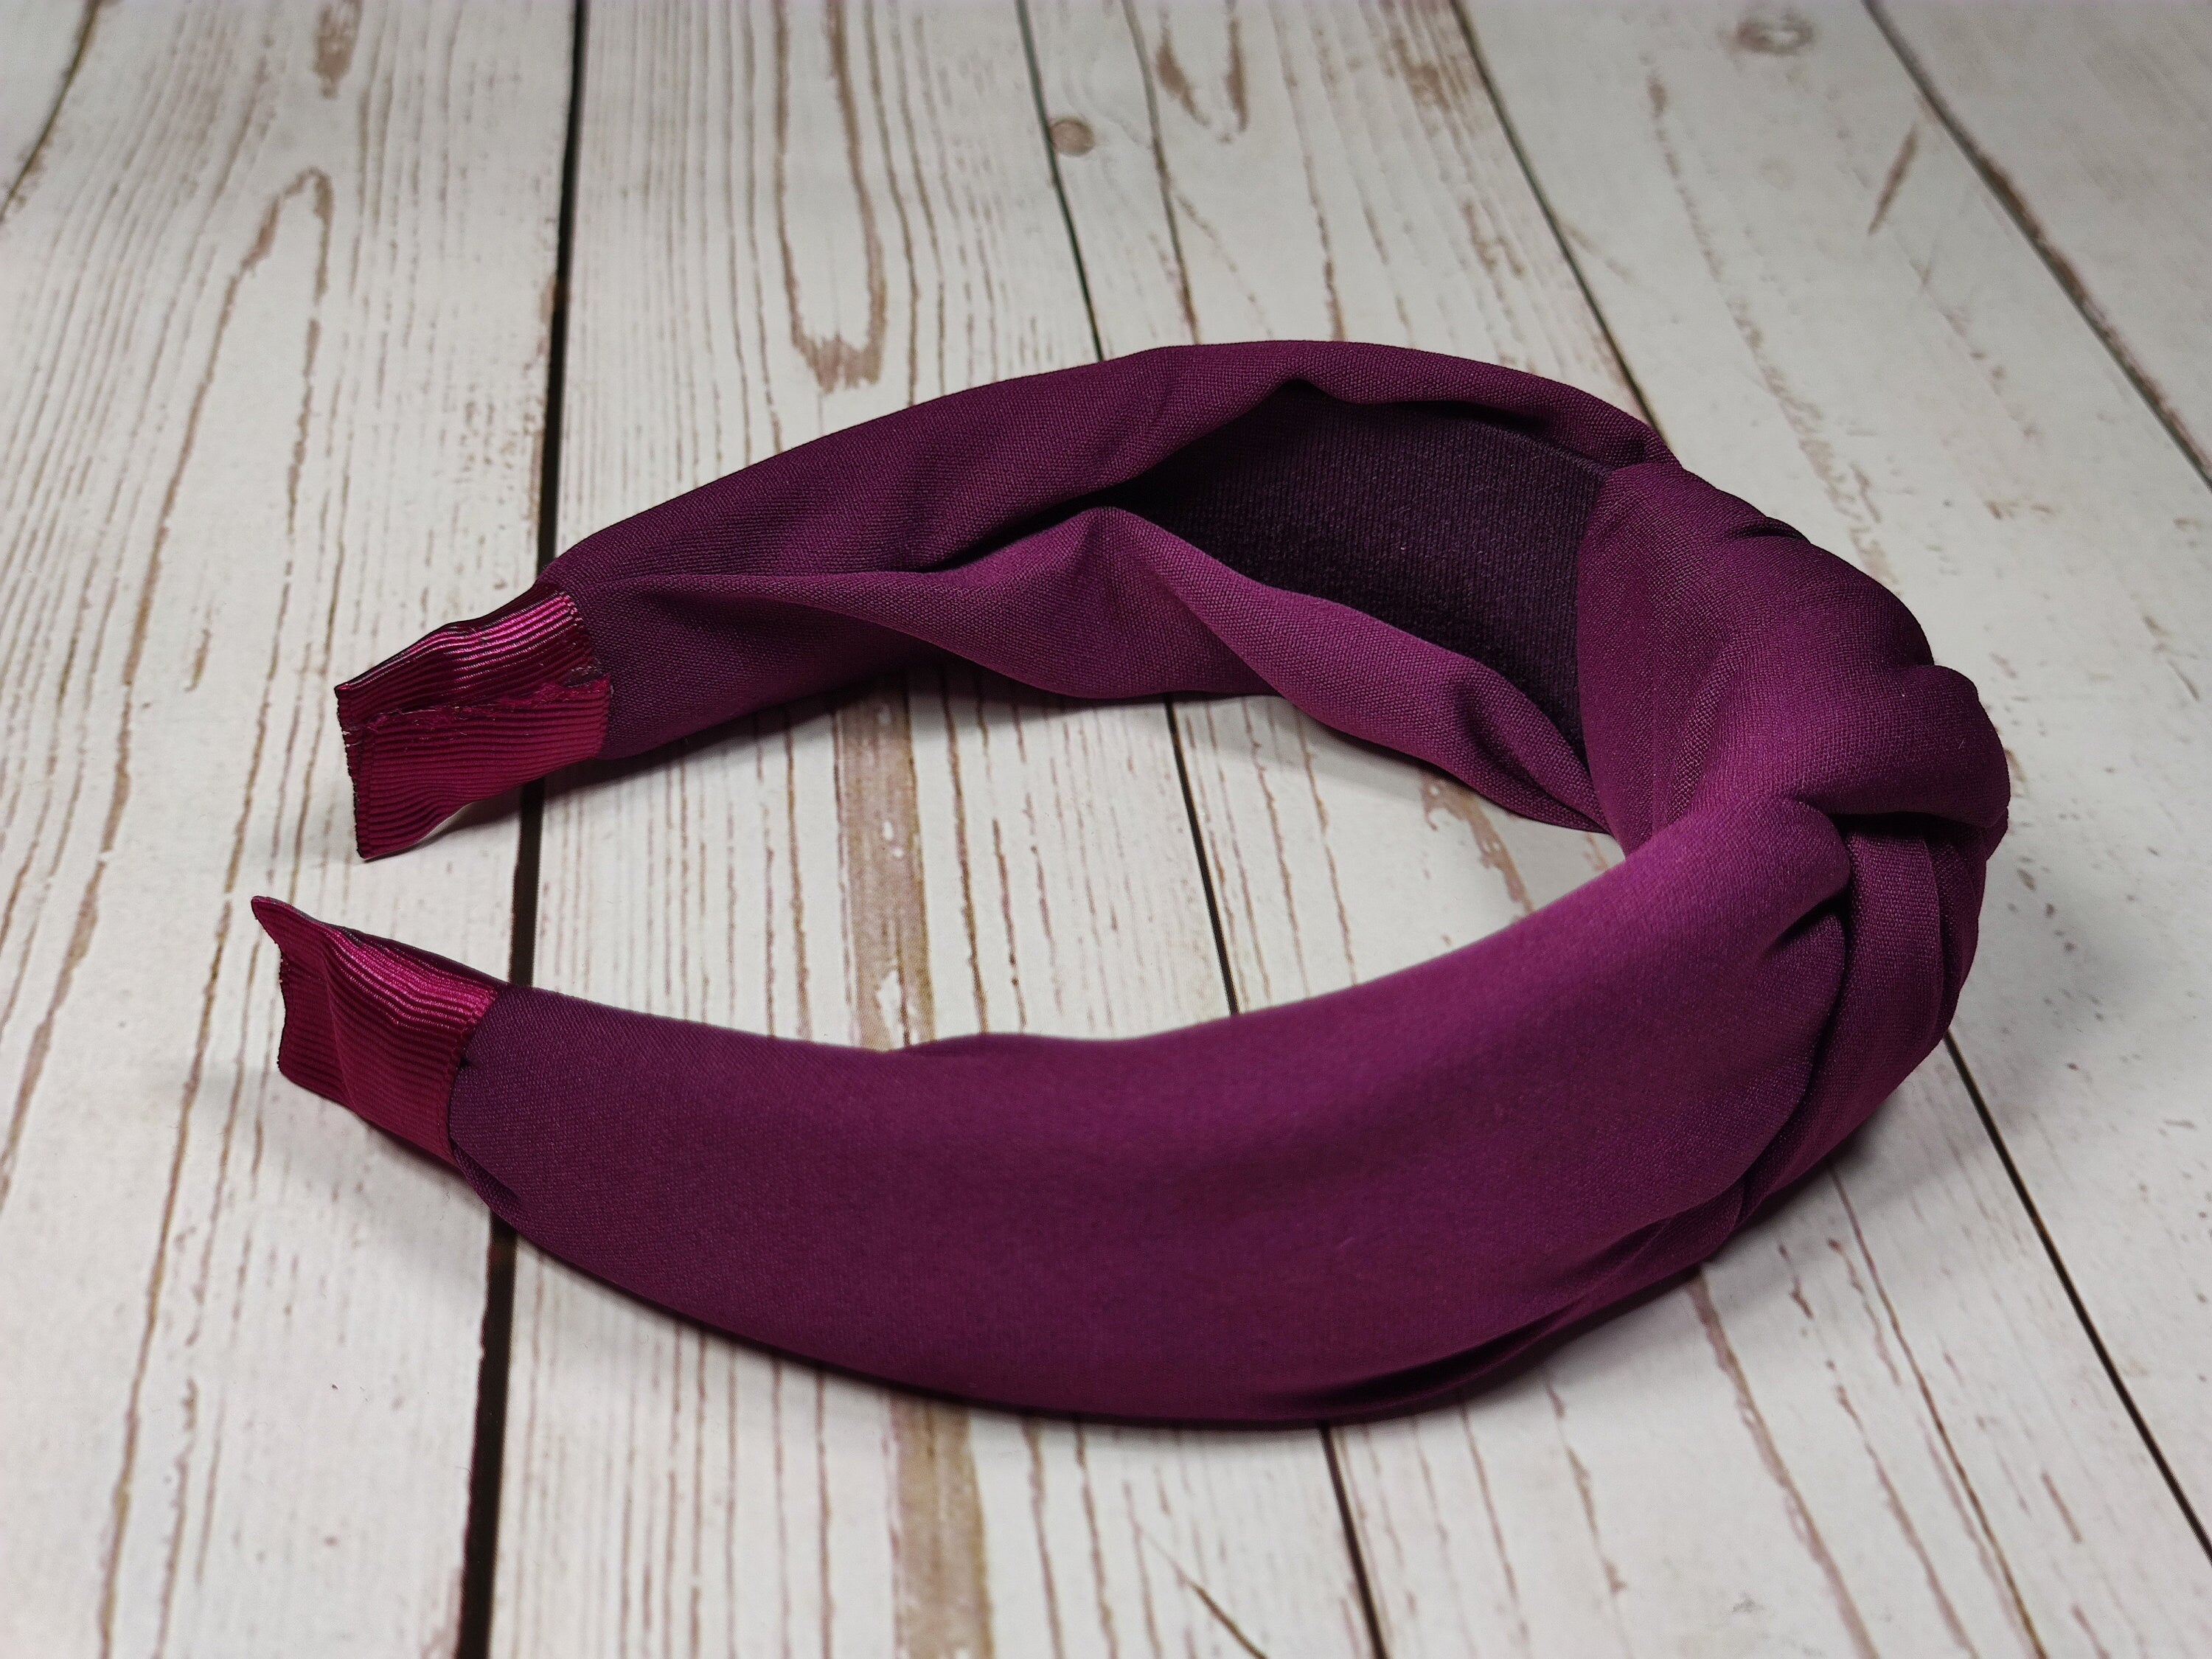 Add a pop of color to your look with this fashionable maroon-colored headband. Made from soft and comfortable viscose crepe material, this headband is perfect for day or night.